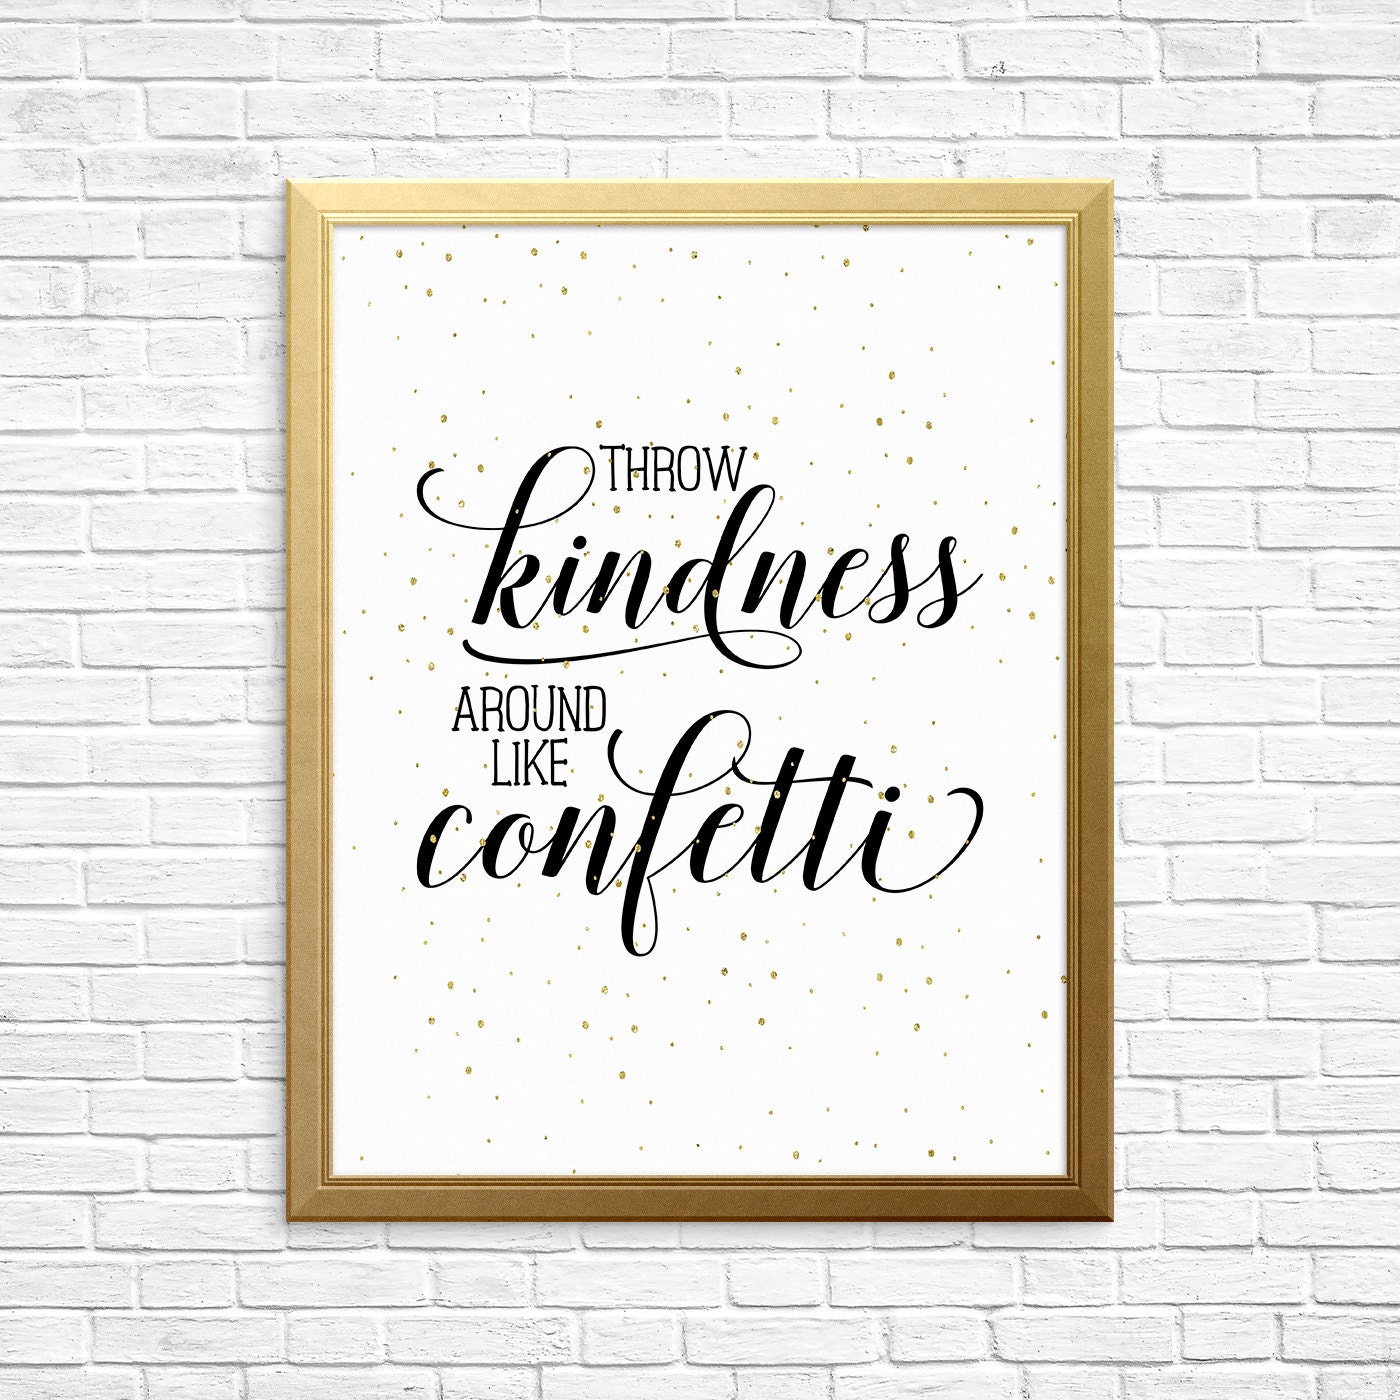 Printable Art, Throw Kindness Around Art Confetti, Kind, Print, Art, Wall - Typography Like Decor, Gold Room Motivational Be Print Quote, Etsy